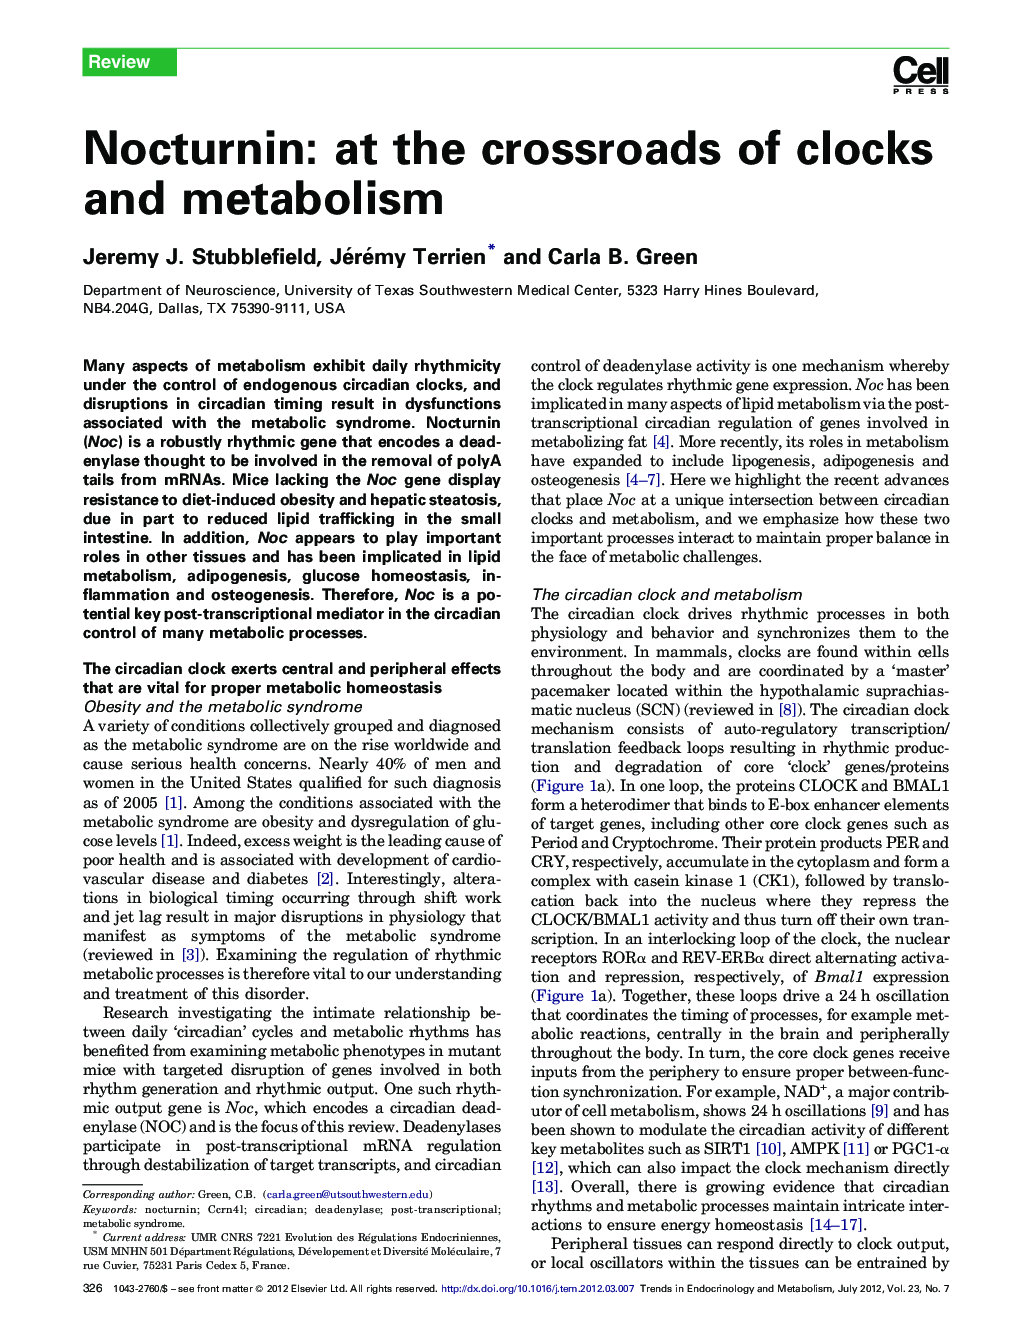 Nocturnin: at the crossroads of clocks and metabolism